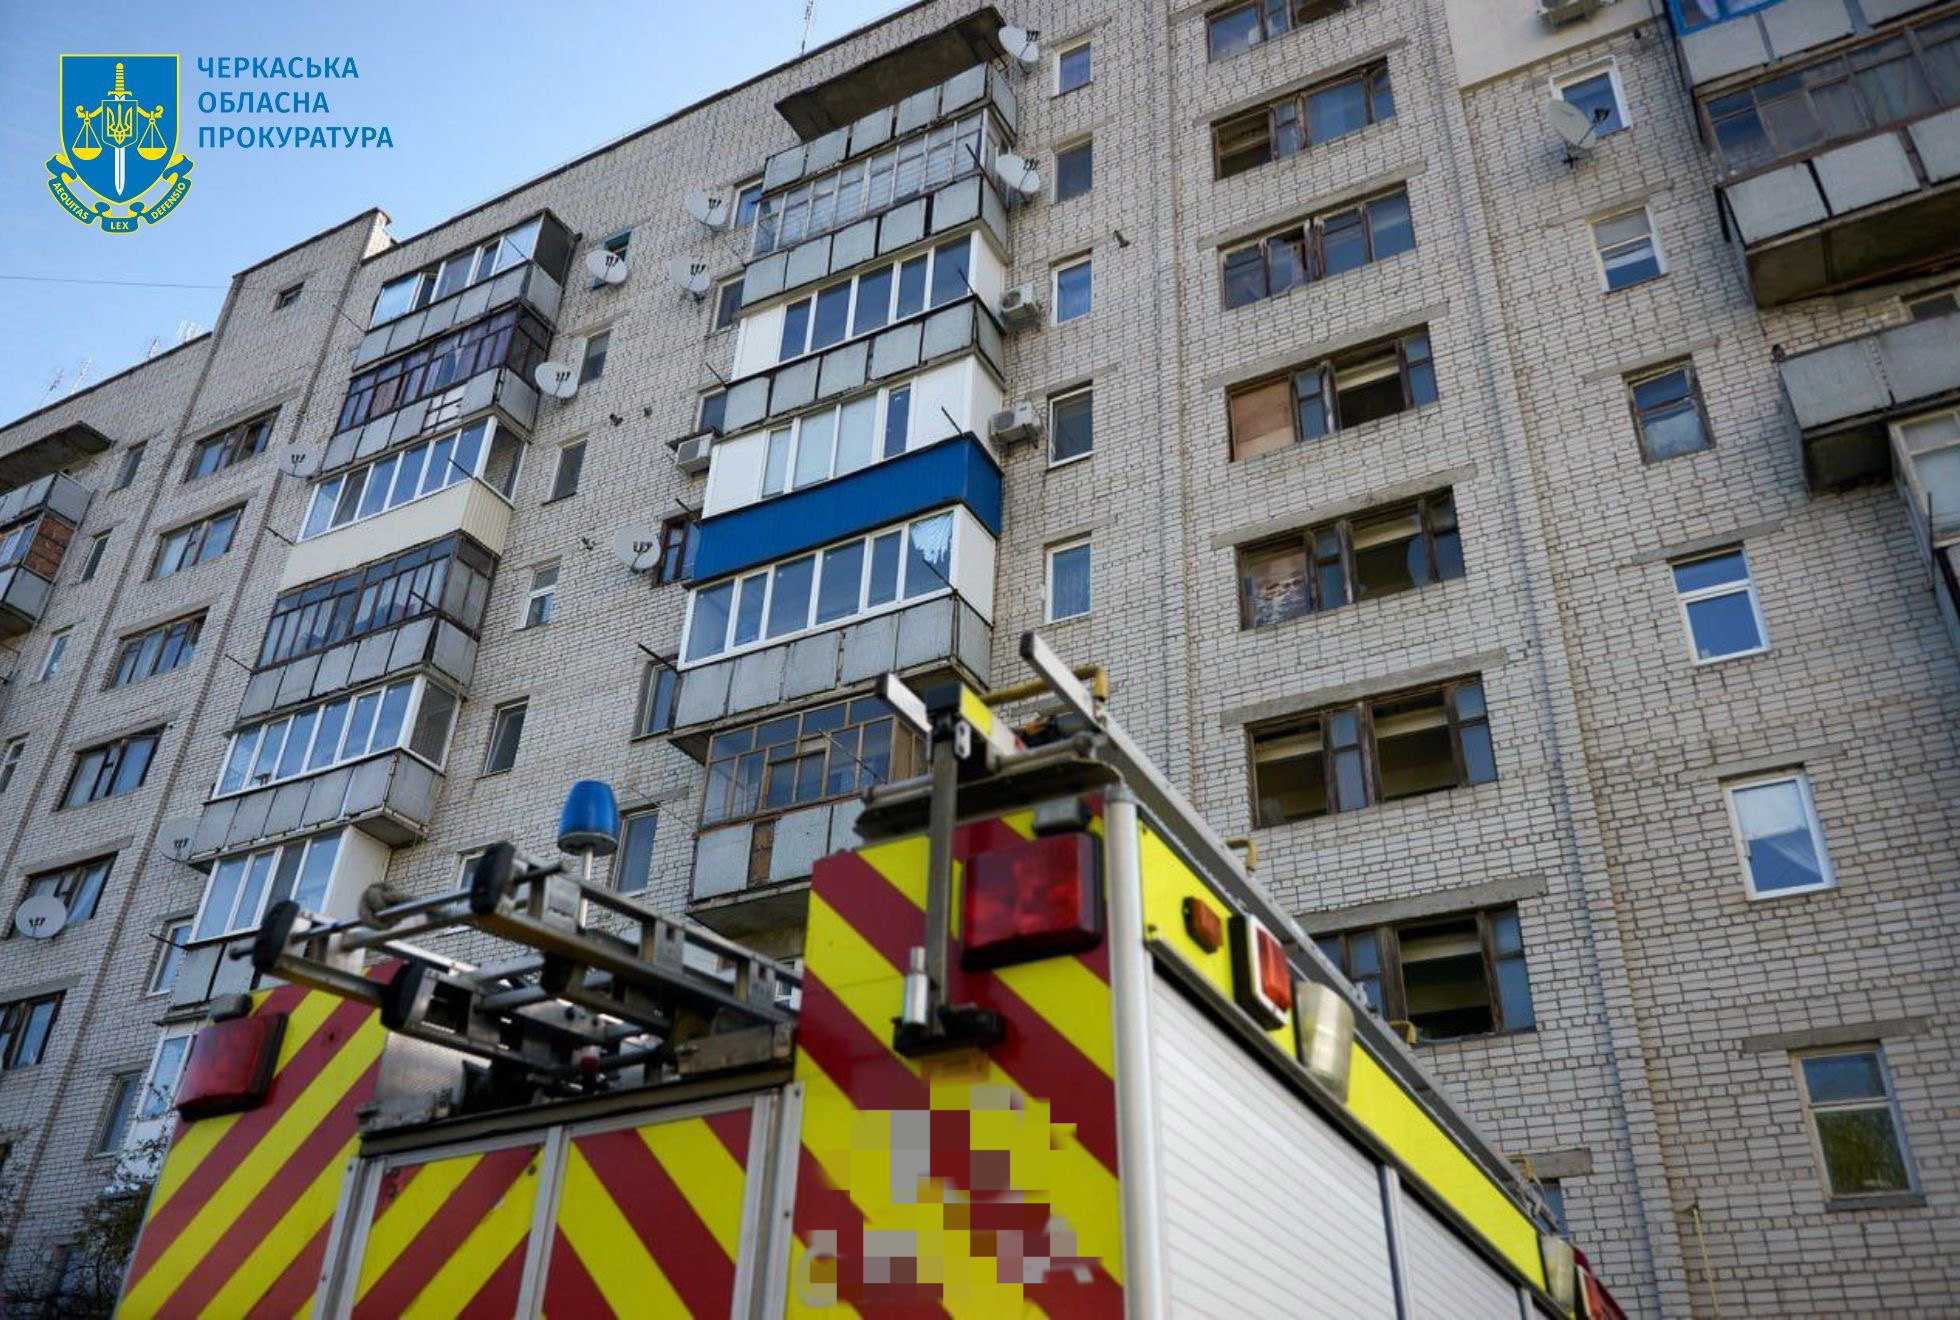 As a result of the explosion in Cherkasy Region, residential buildings were damaged